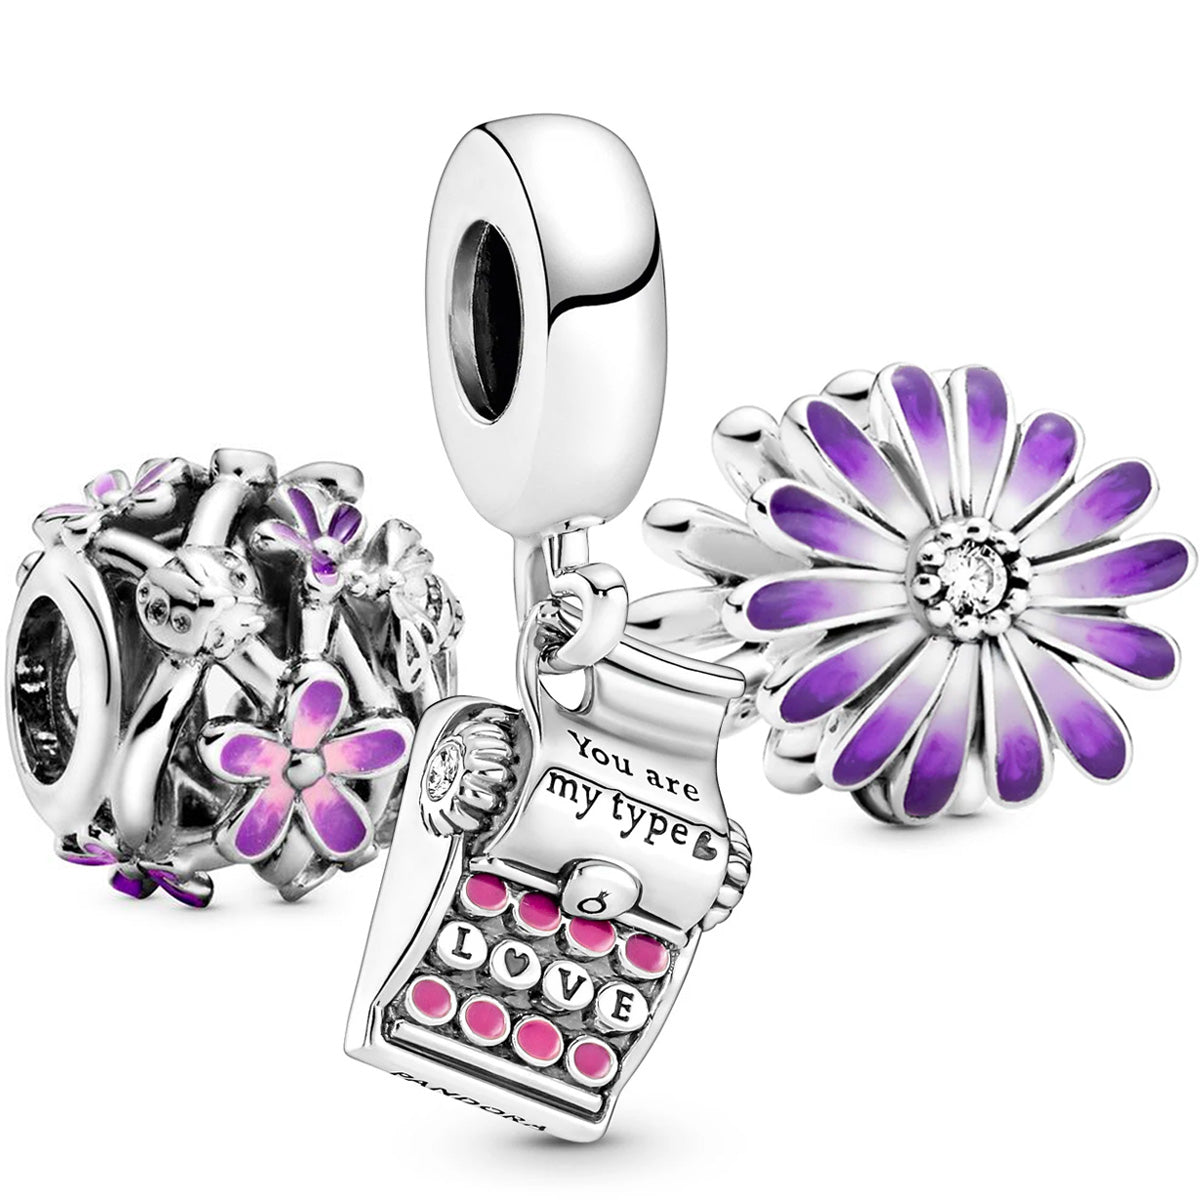 "From Your Secret Admirer" Charm Set